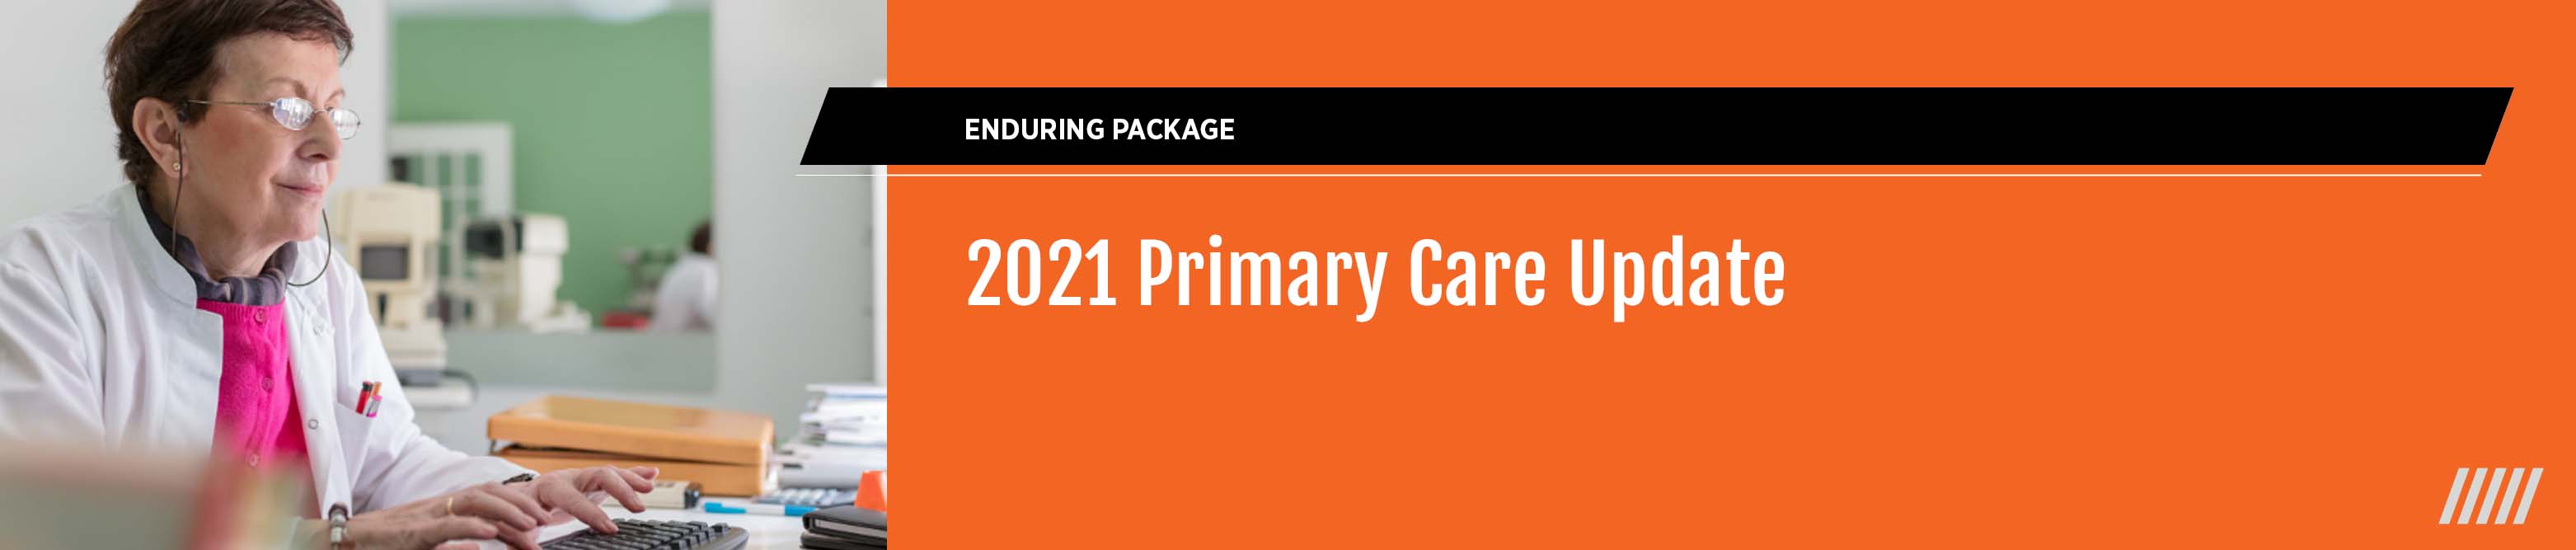 2021 Primary Care Update - Enduring Package Banner